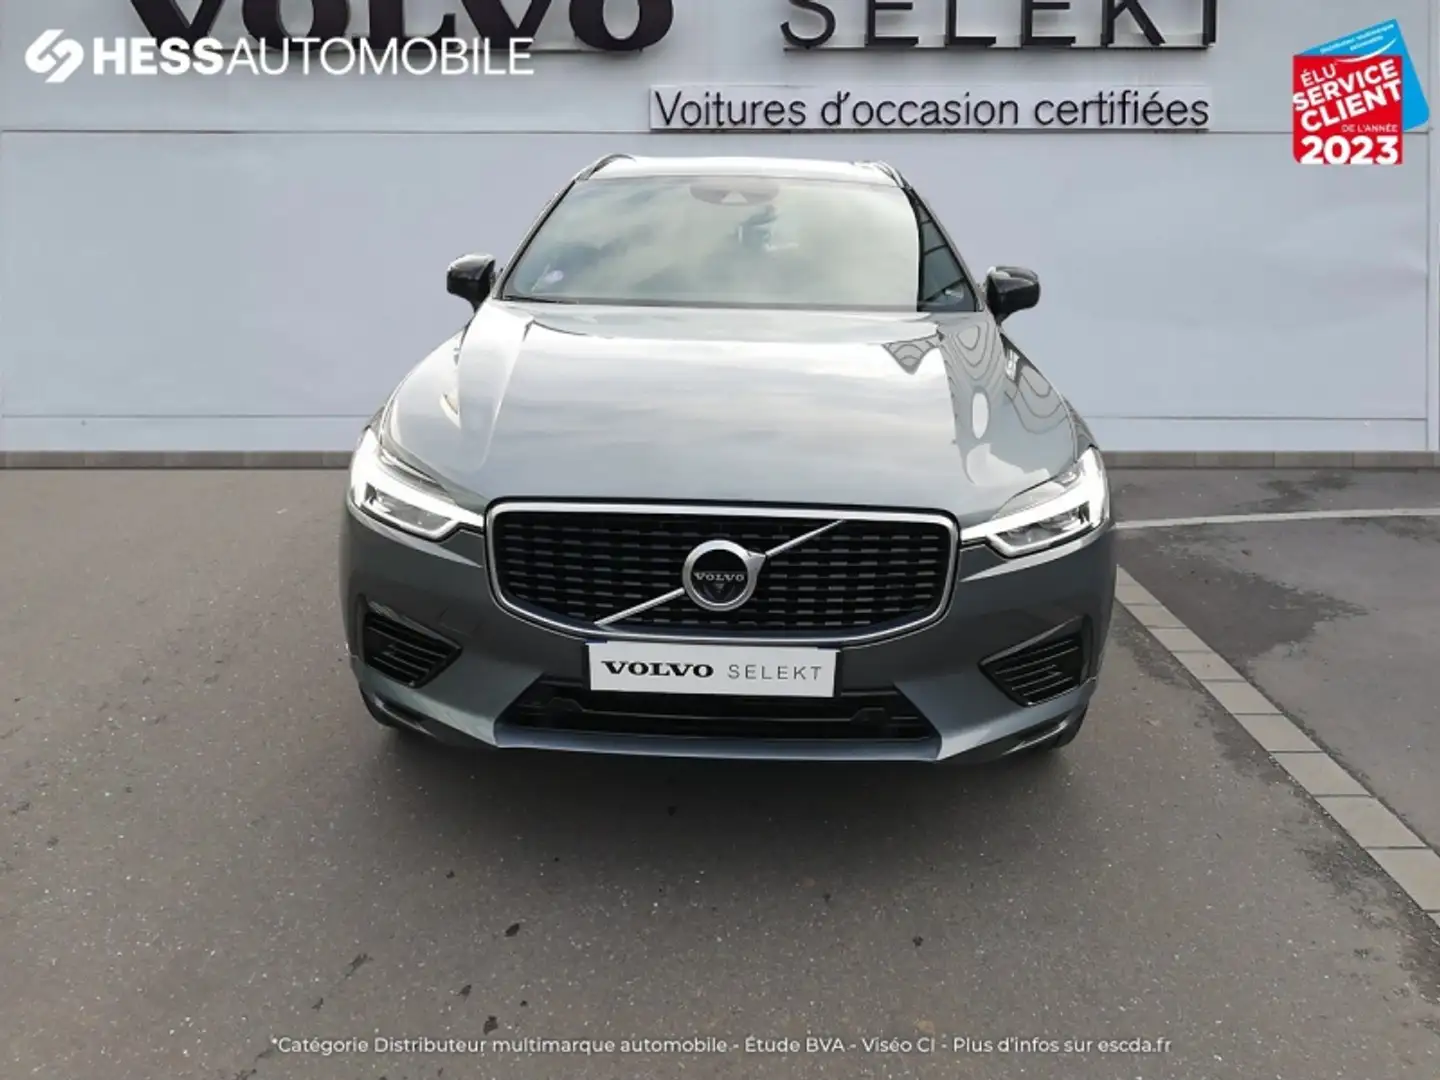 Volvo XC60 T8 Twin Engine 303 + 87ch R-Design Geartronic - 2